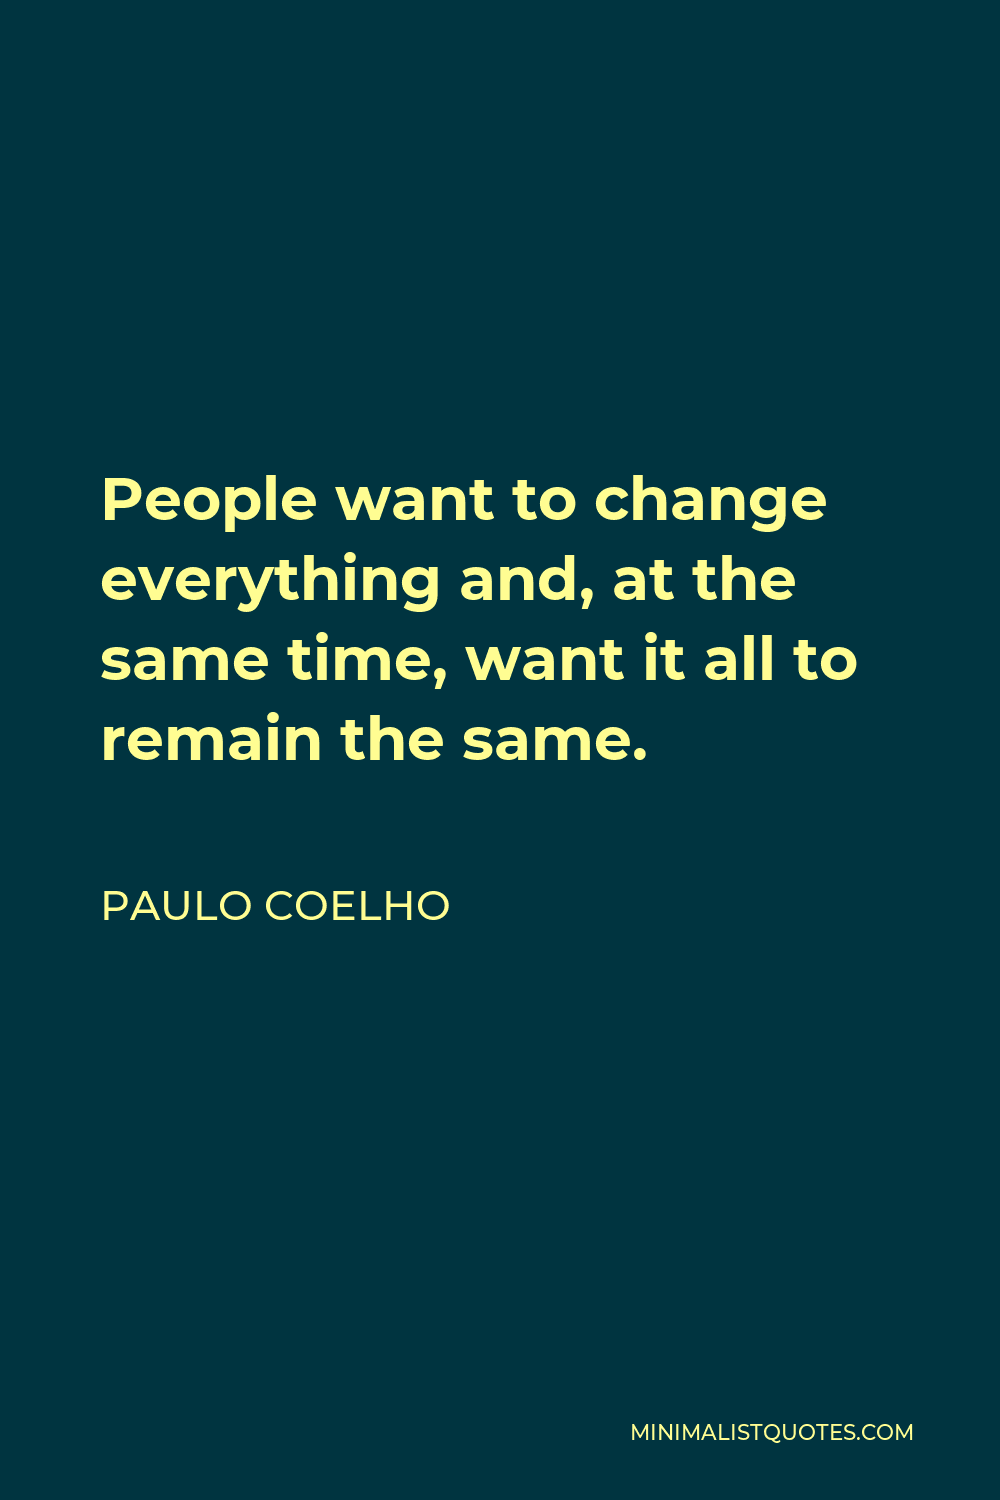 Paulo Coelho Quote - People want to change everything and, at the same time, want it all to remain the same.